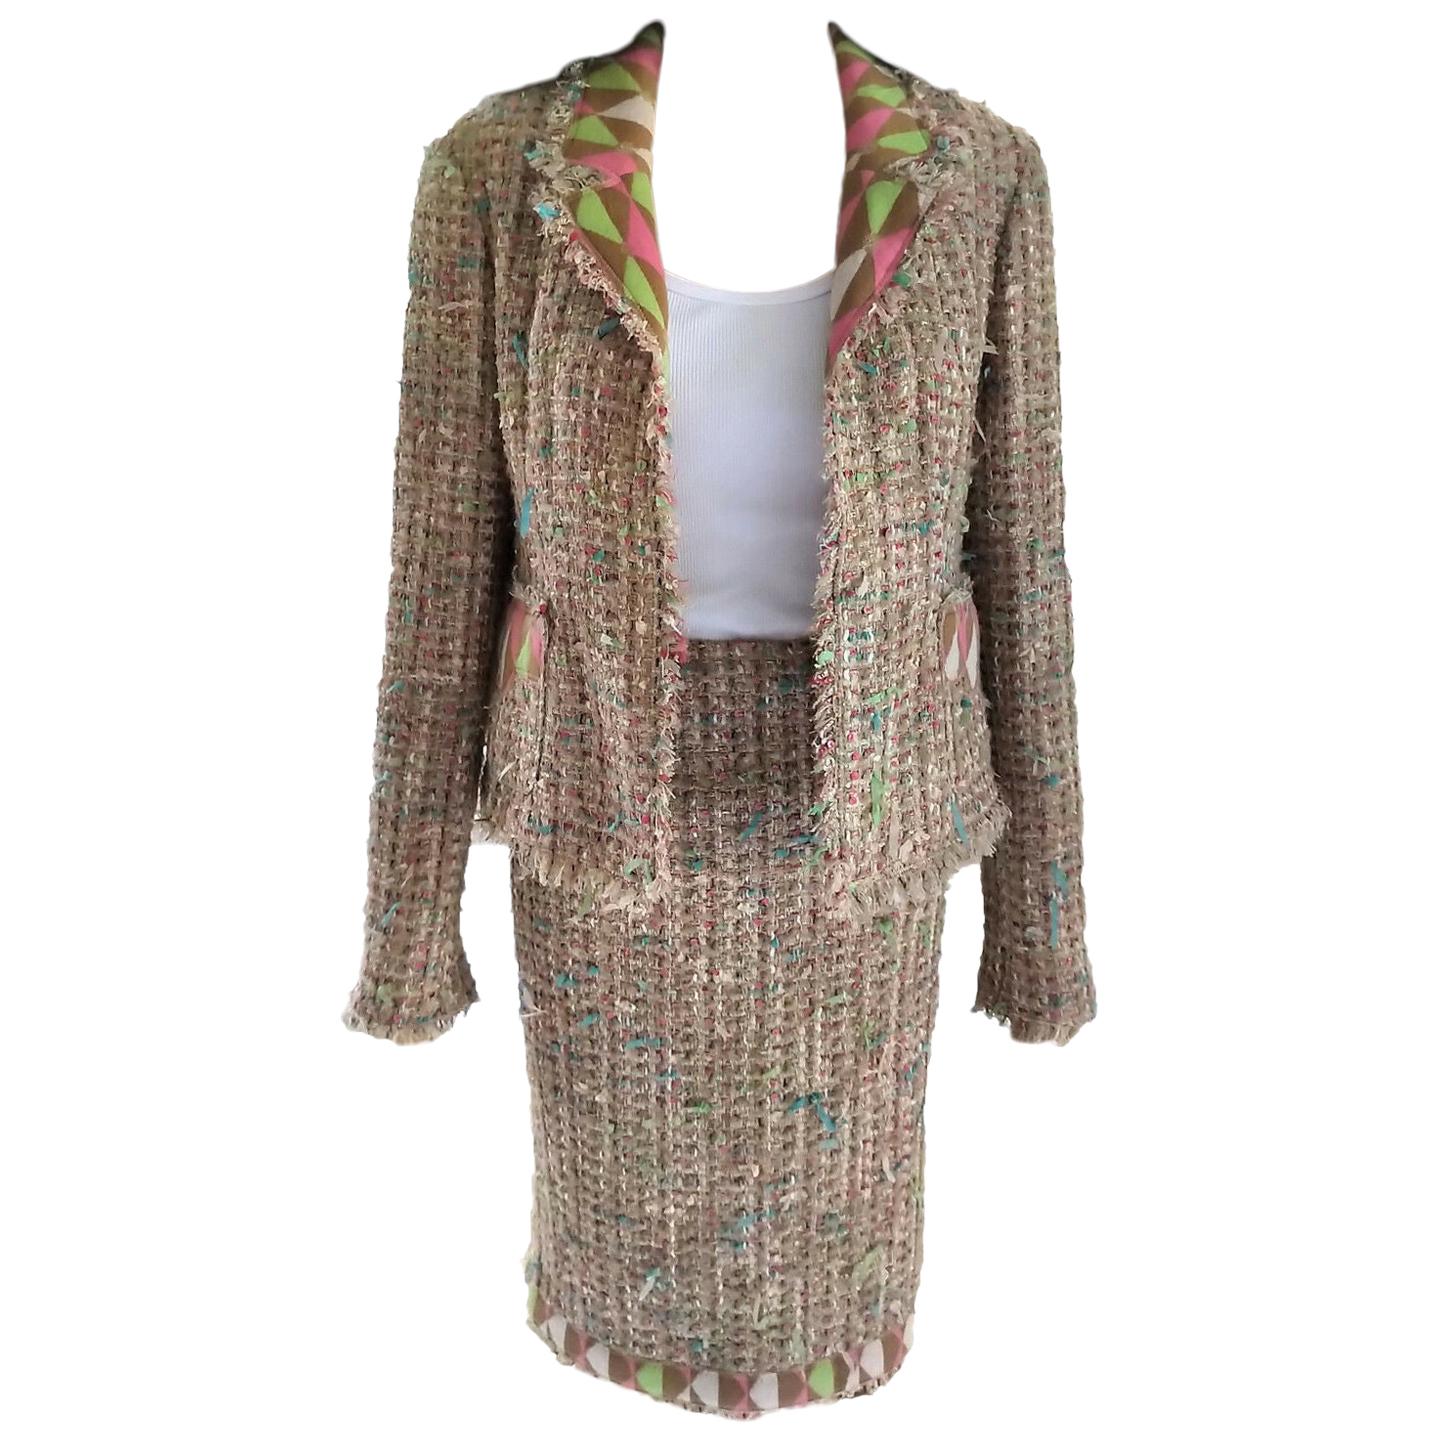 Chanel 2004 04A Nude-Beige Fantasy Tweed Sequin Jacket and Skirt Suit FR  38/ US 6 at 1stDibs